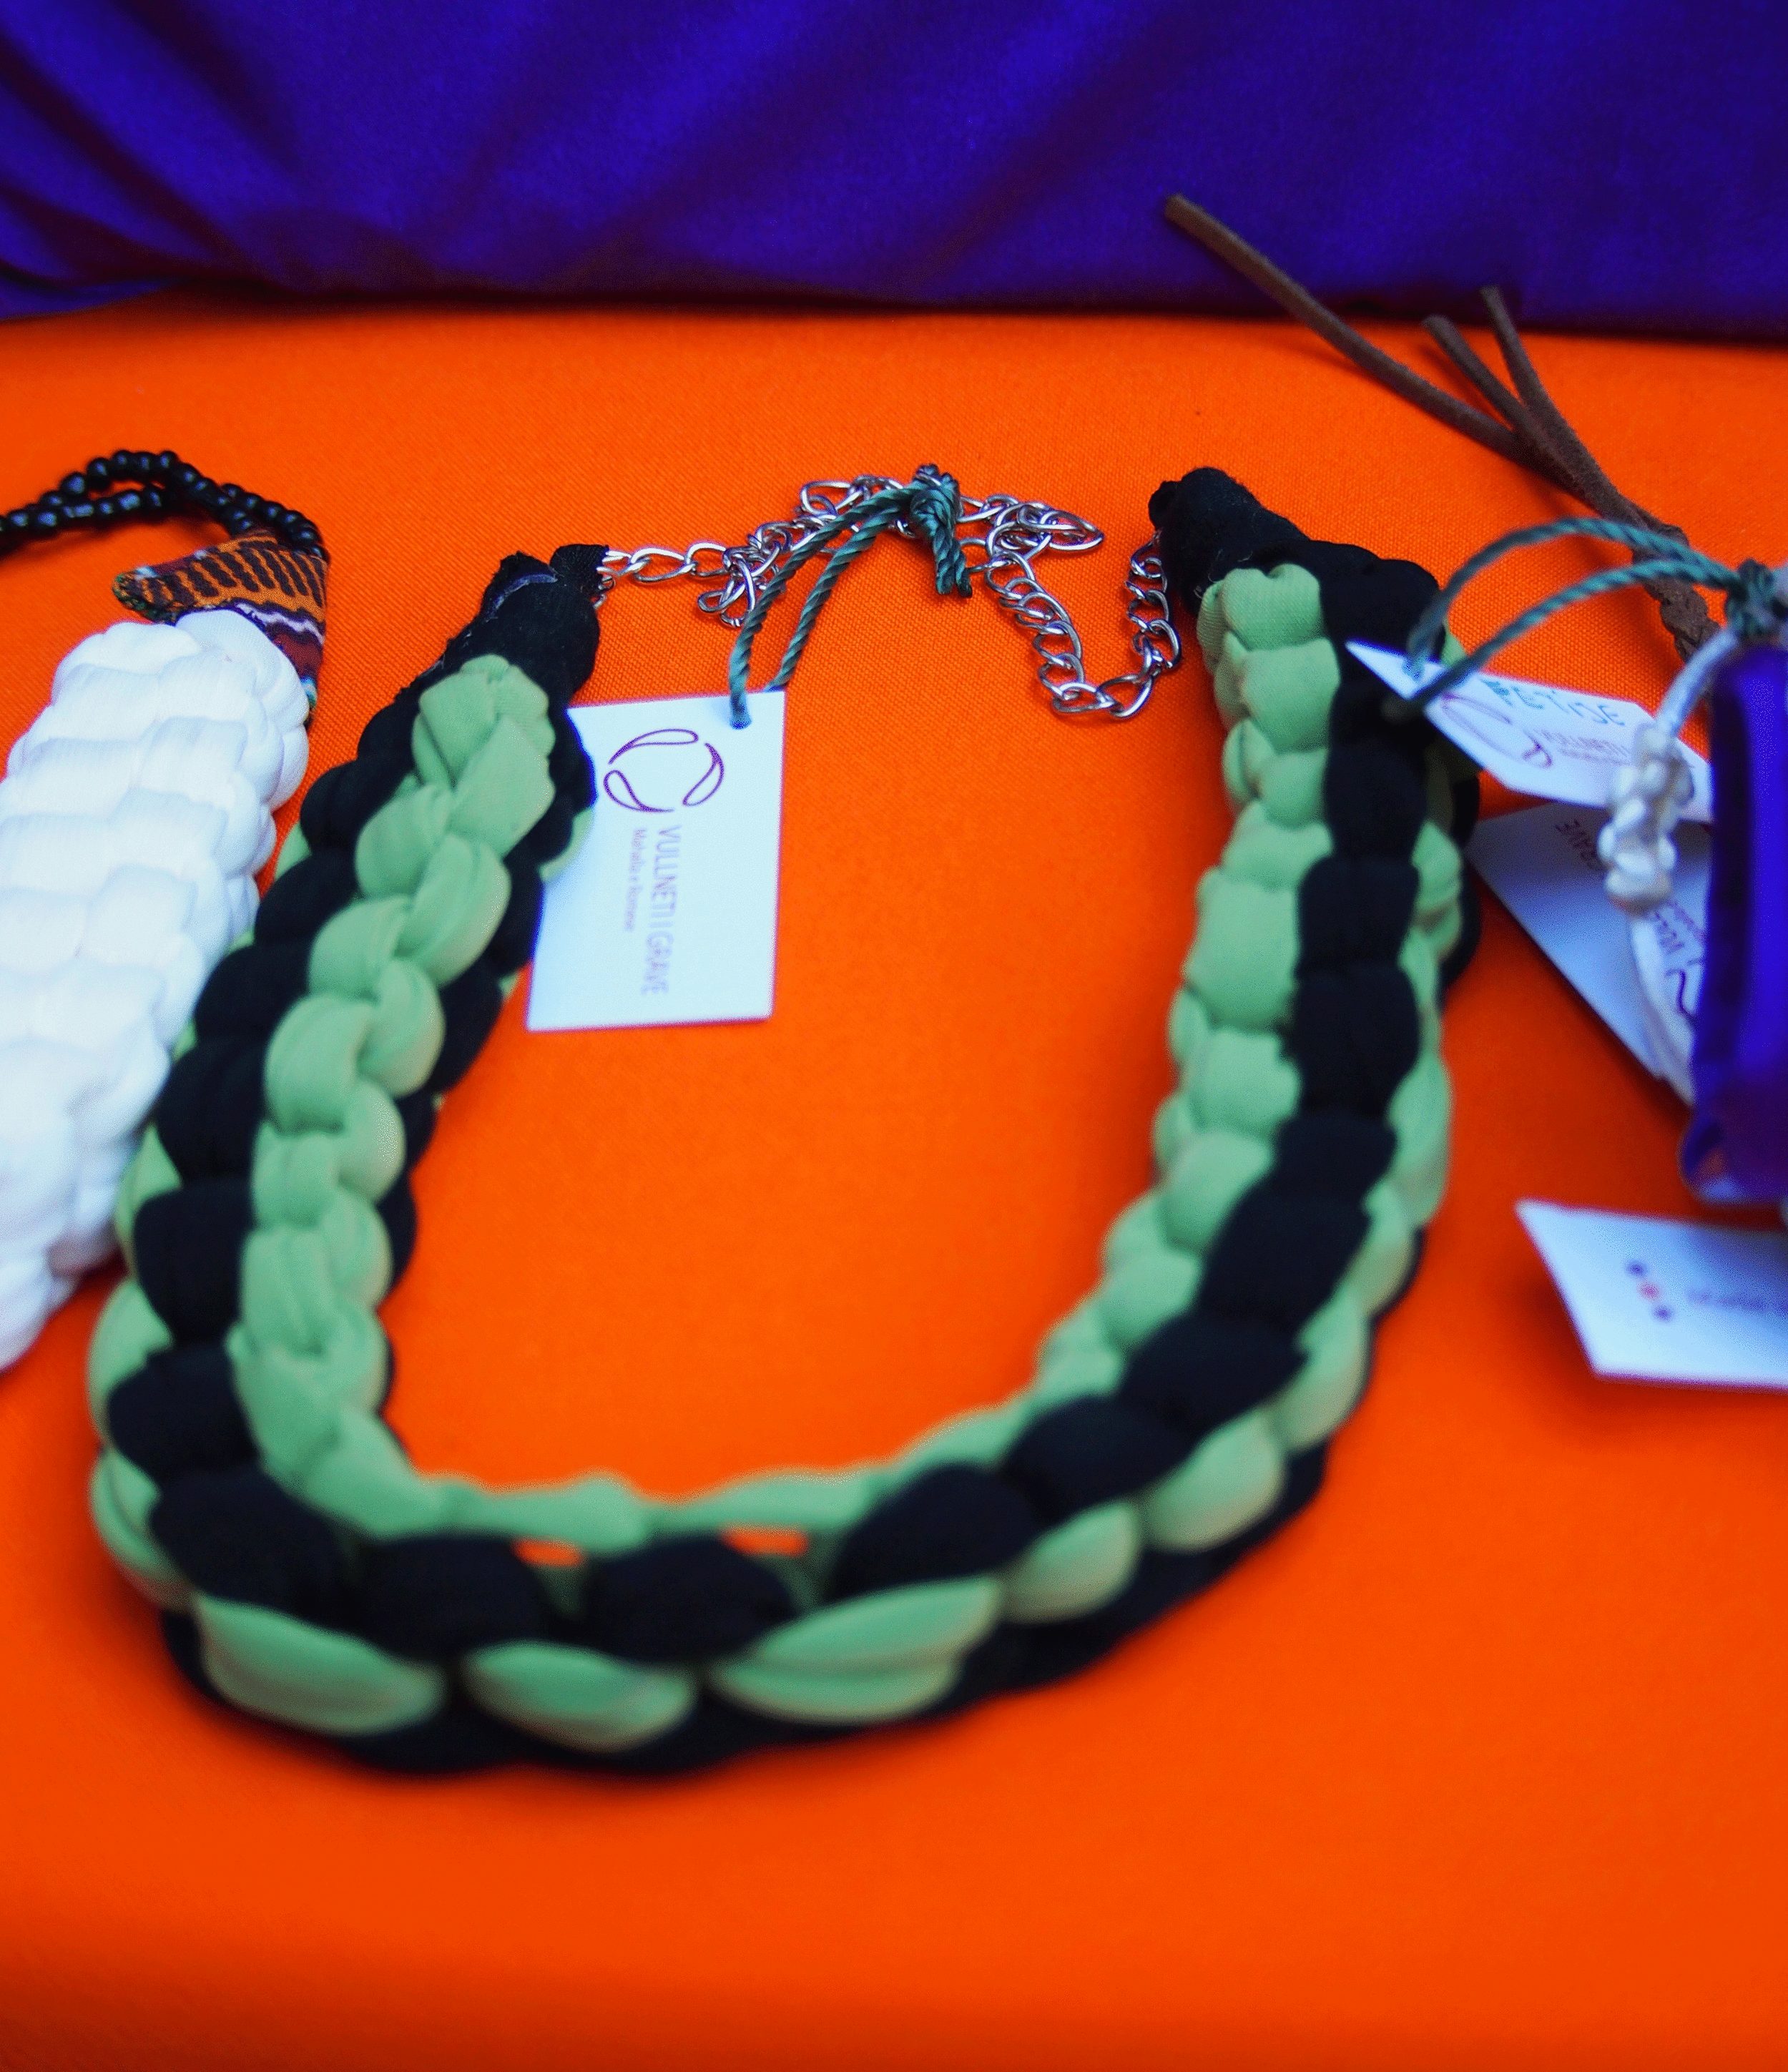 Neckles made from recycled plastic bags